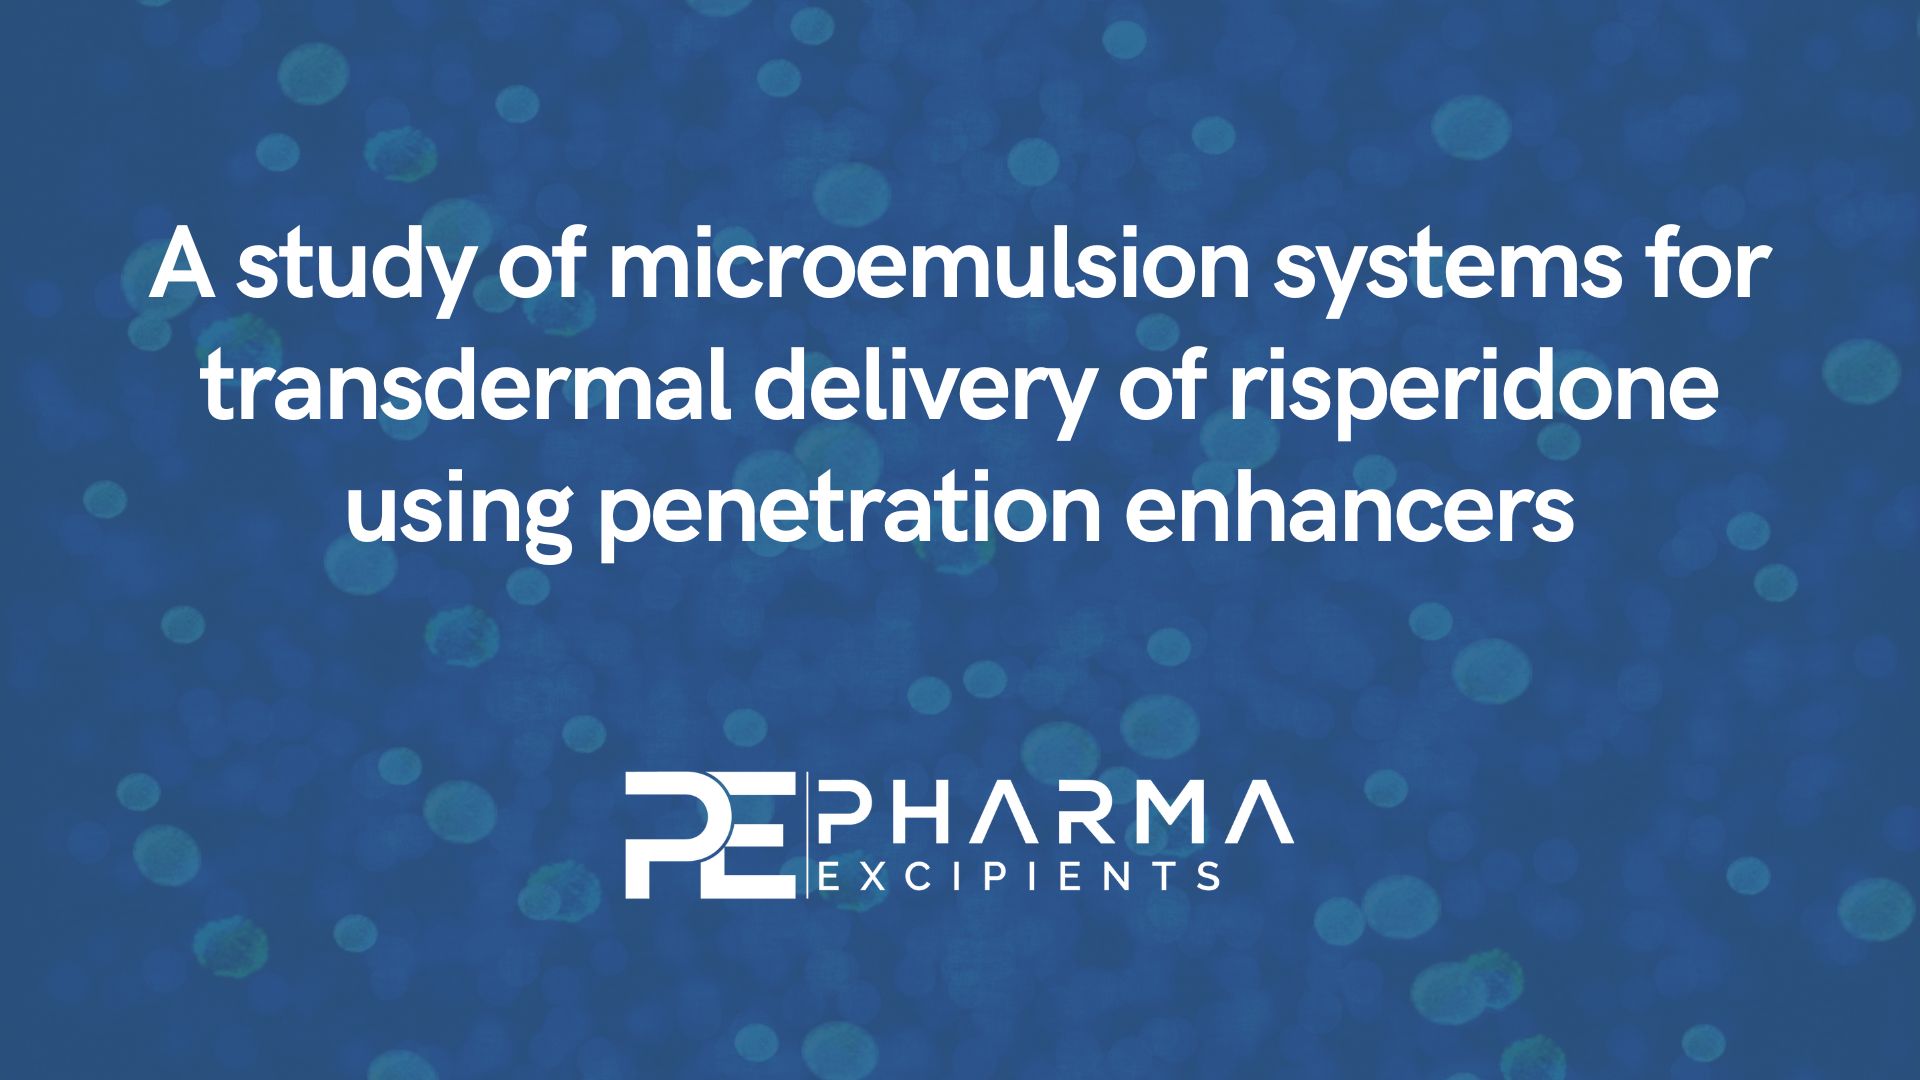 A study of microemulsion systems for transdermal delivery of risperidone using penetration enhancers